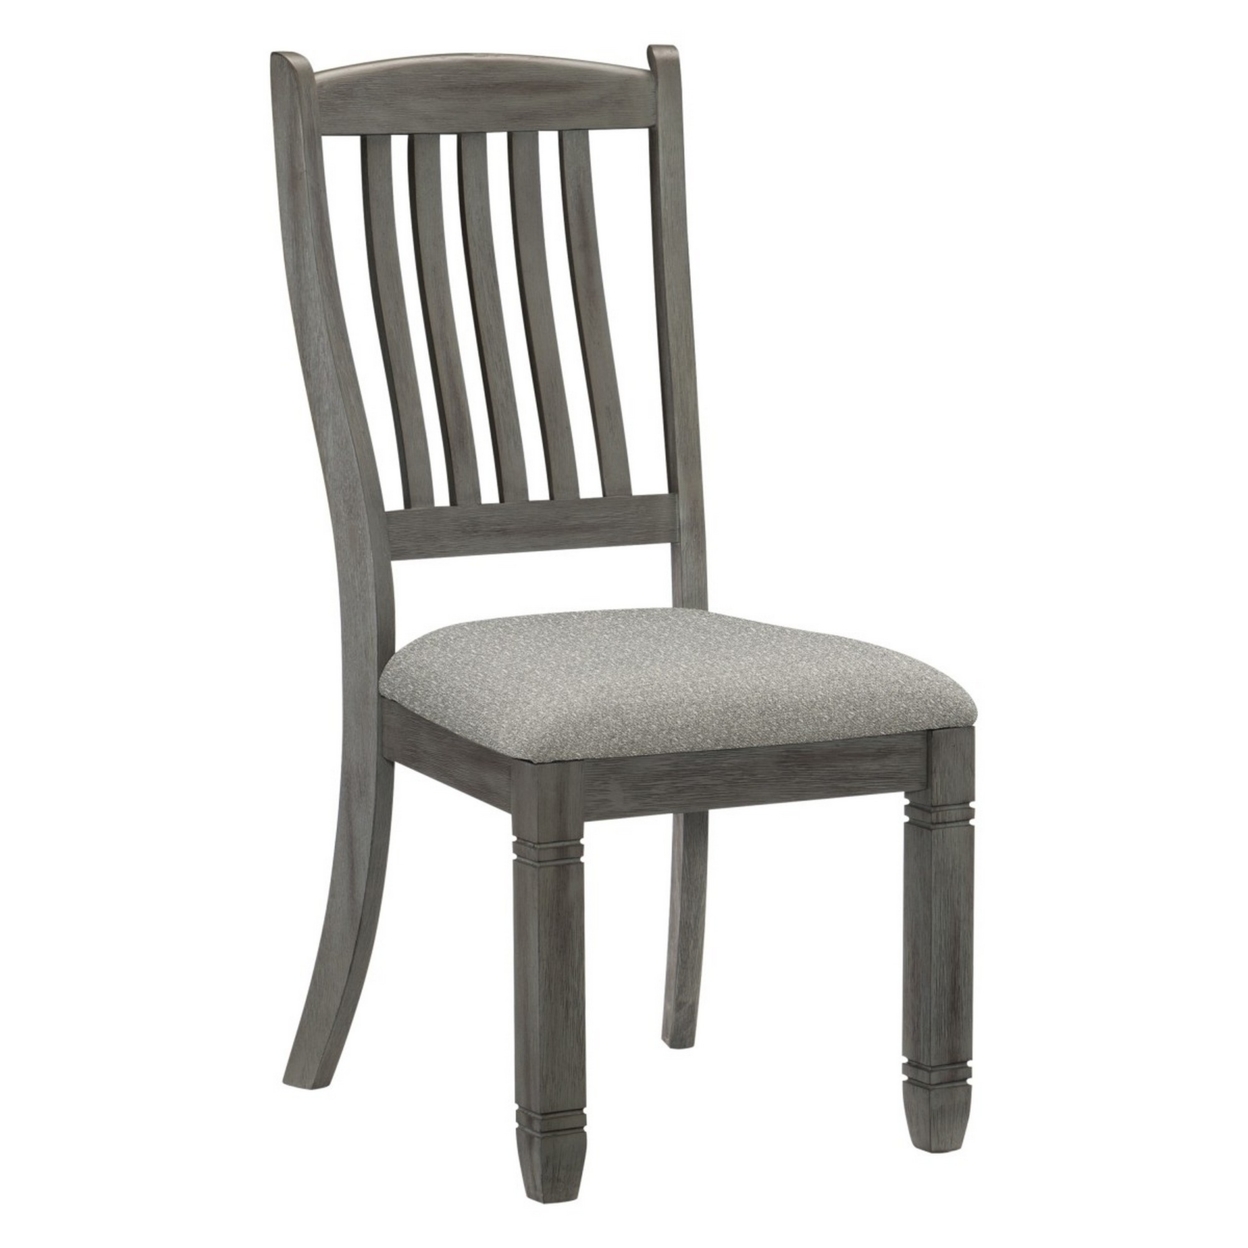 Slatted Back Wooden Side Chair With Padded Seat, Set Of 2, Gray- Saltoro Sherpi